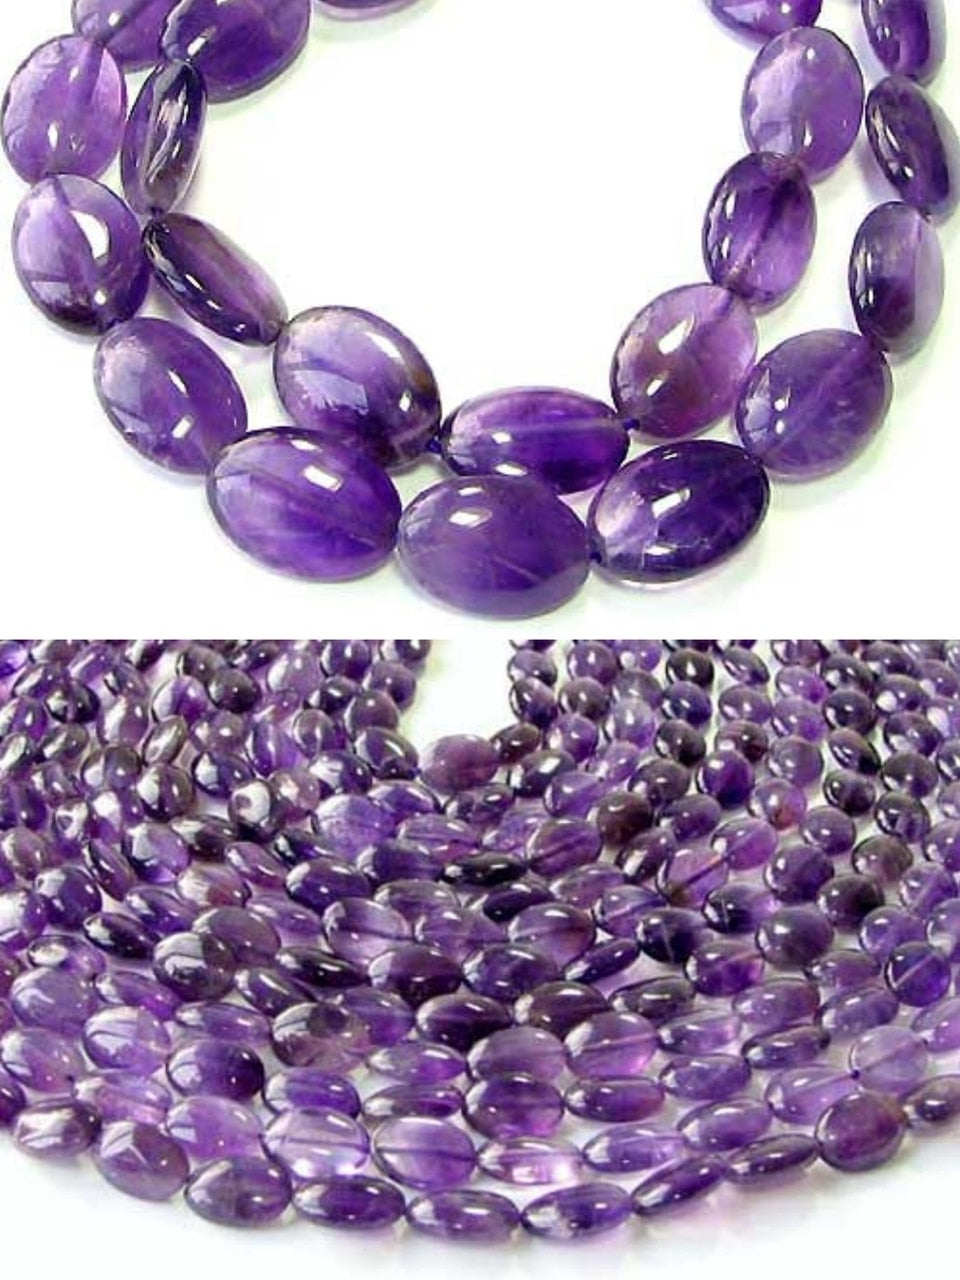 Yummy Natural Amethyst 14x10mm Oval Bead Strand 109161 - PremiumBead Primary Image 1